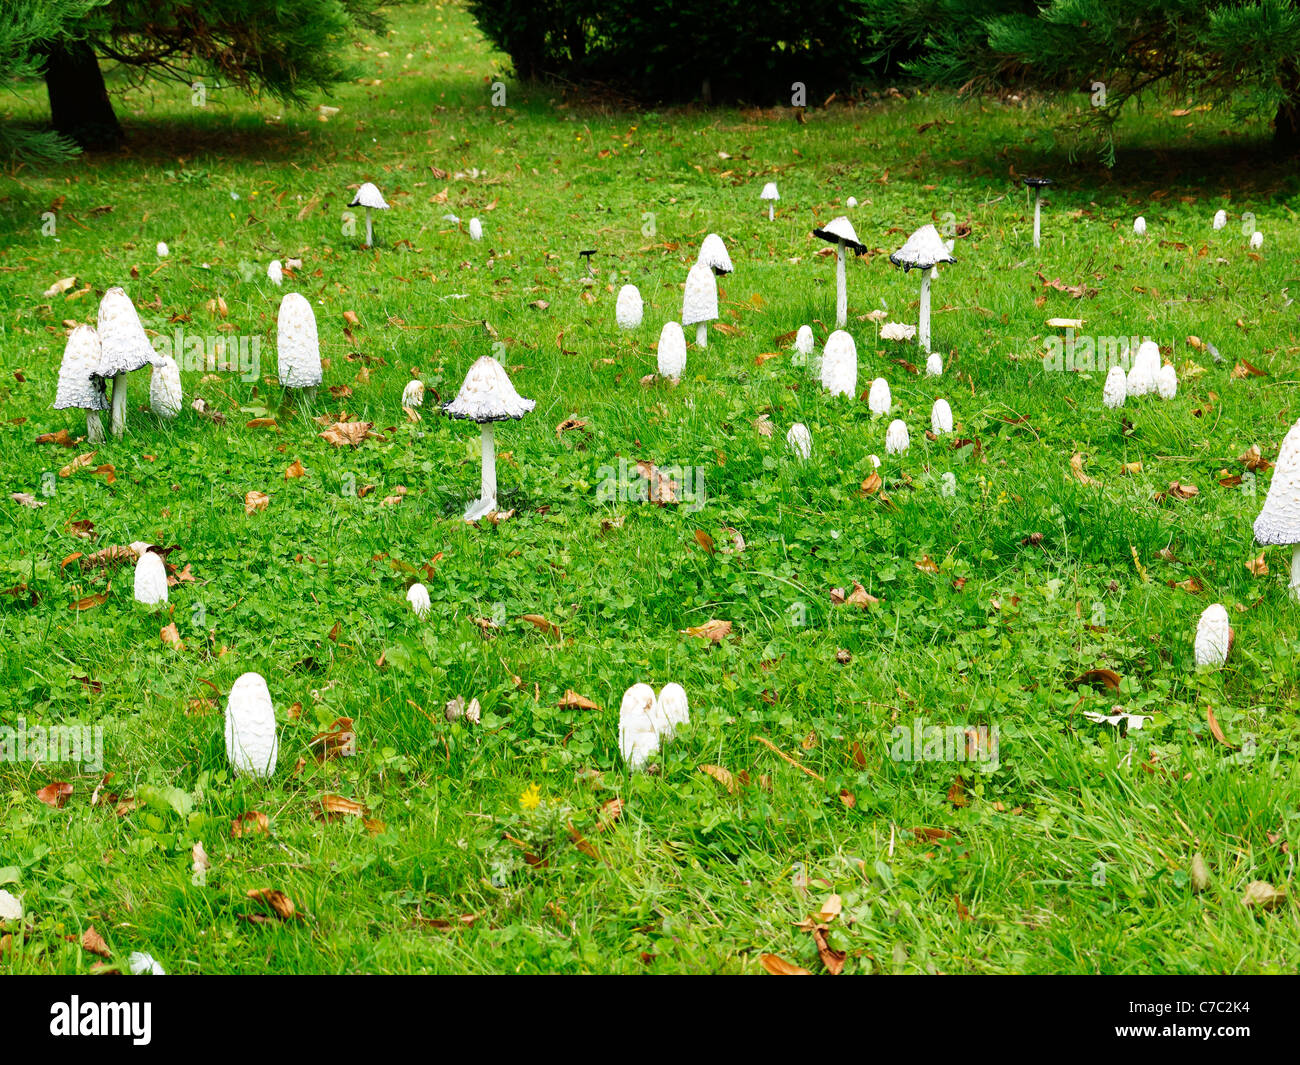 A number of fungi mushrooms or toadstools growing on grass under trees September Autumn UK Stock Photo